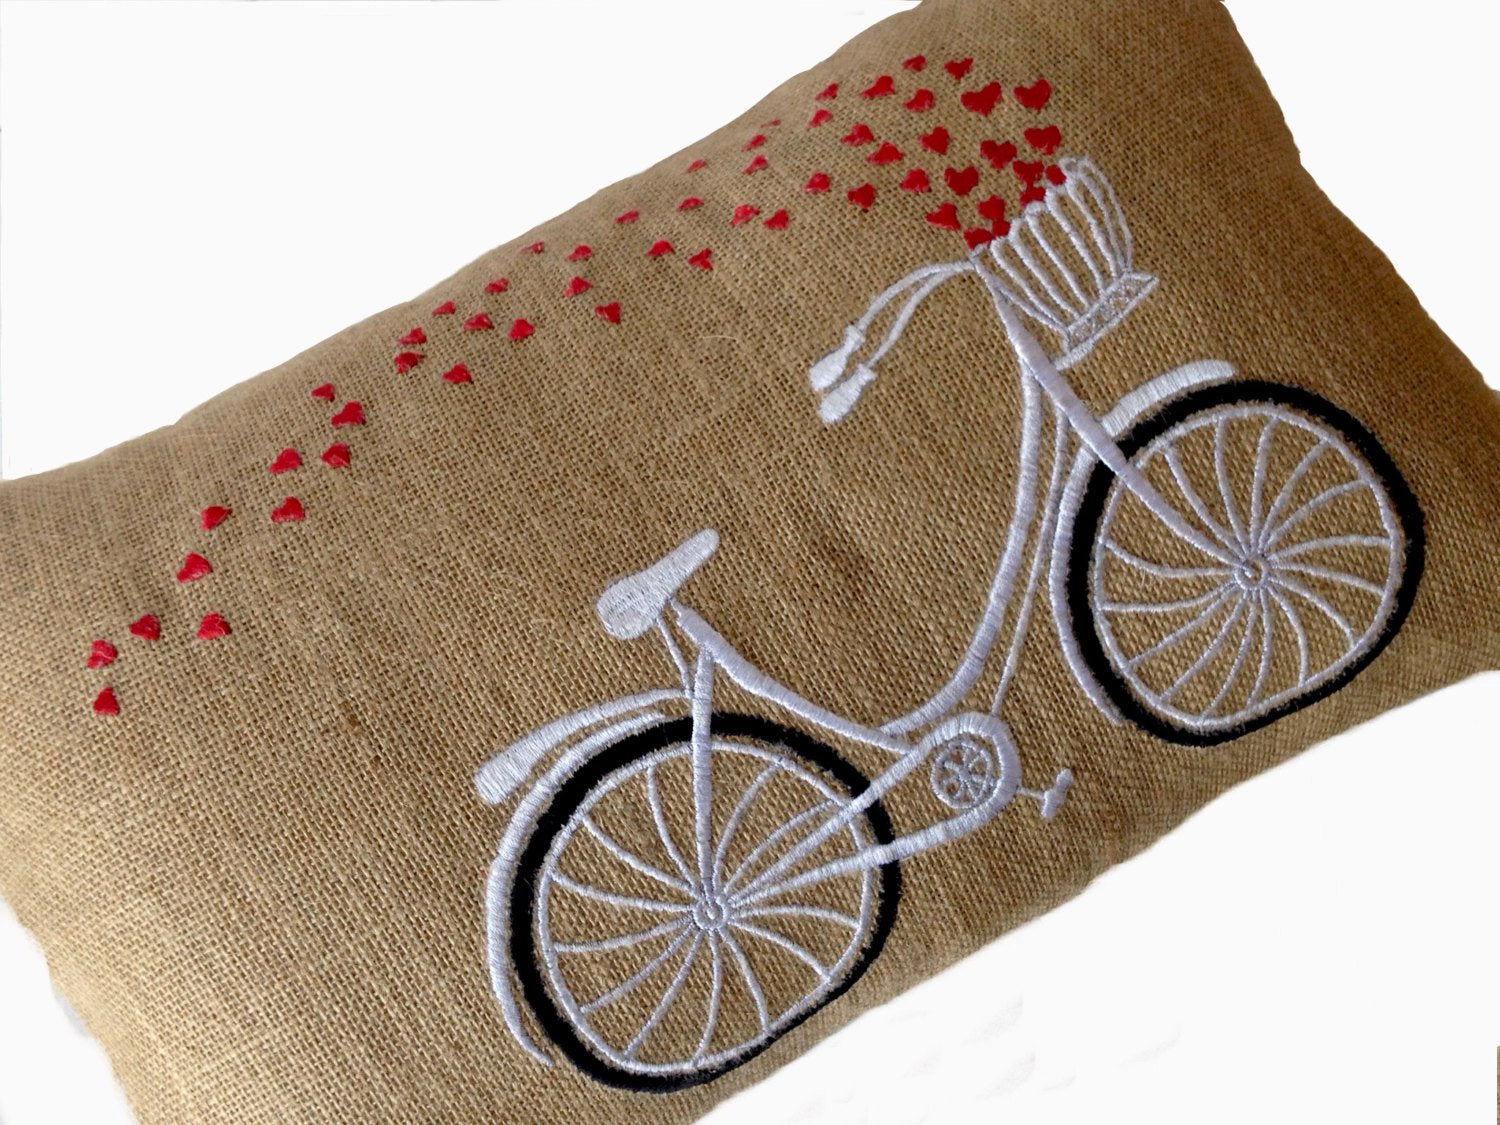 burlap pillow with bicycle embroidery